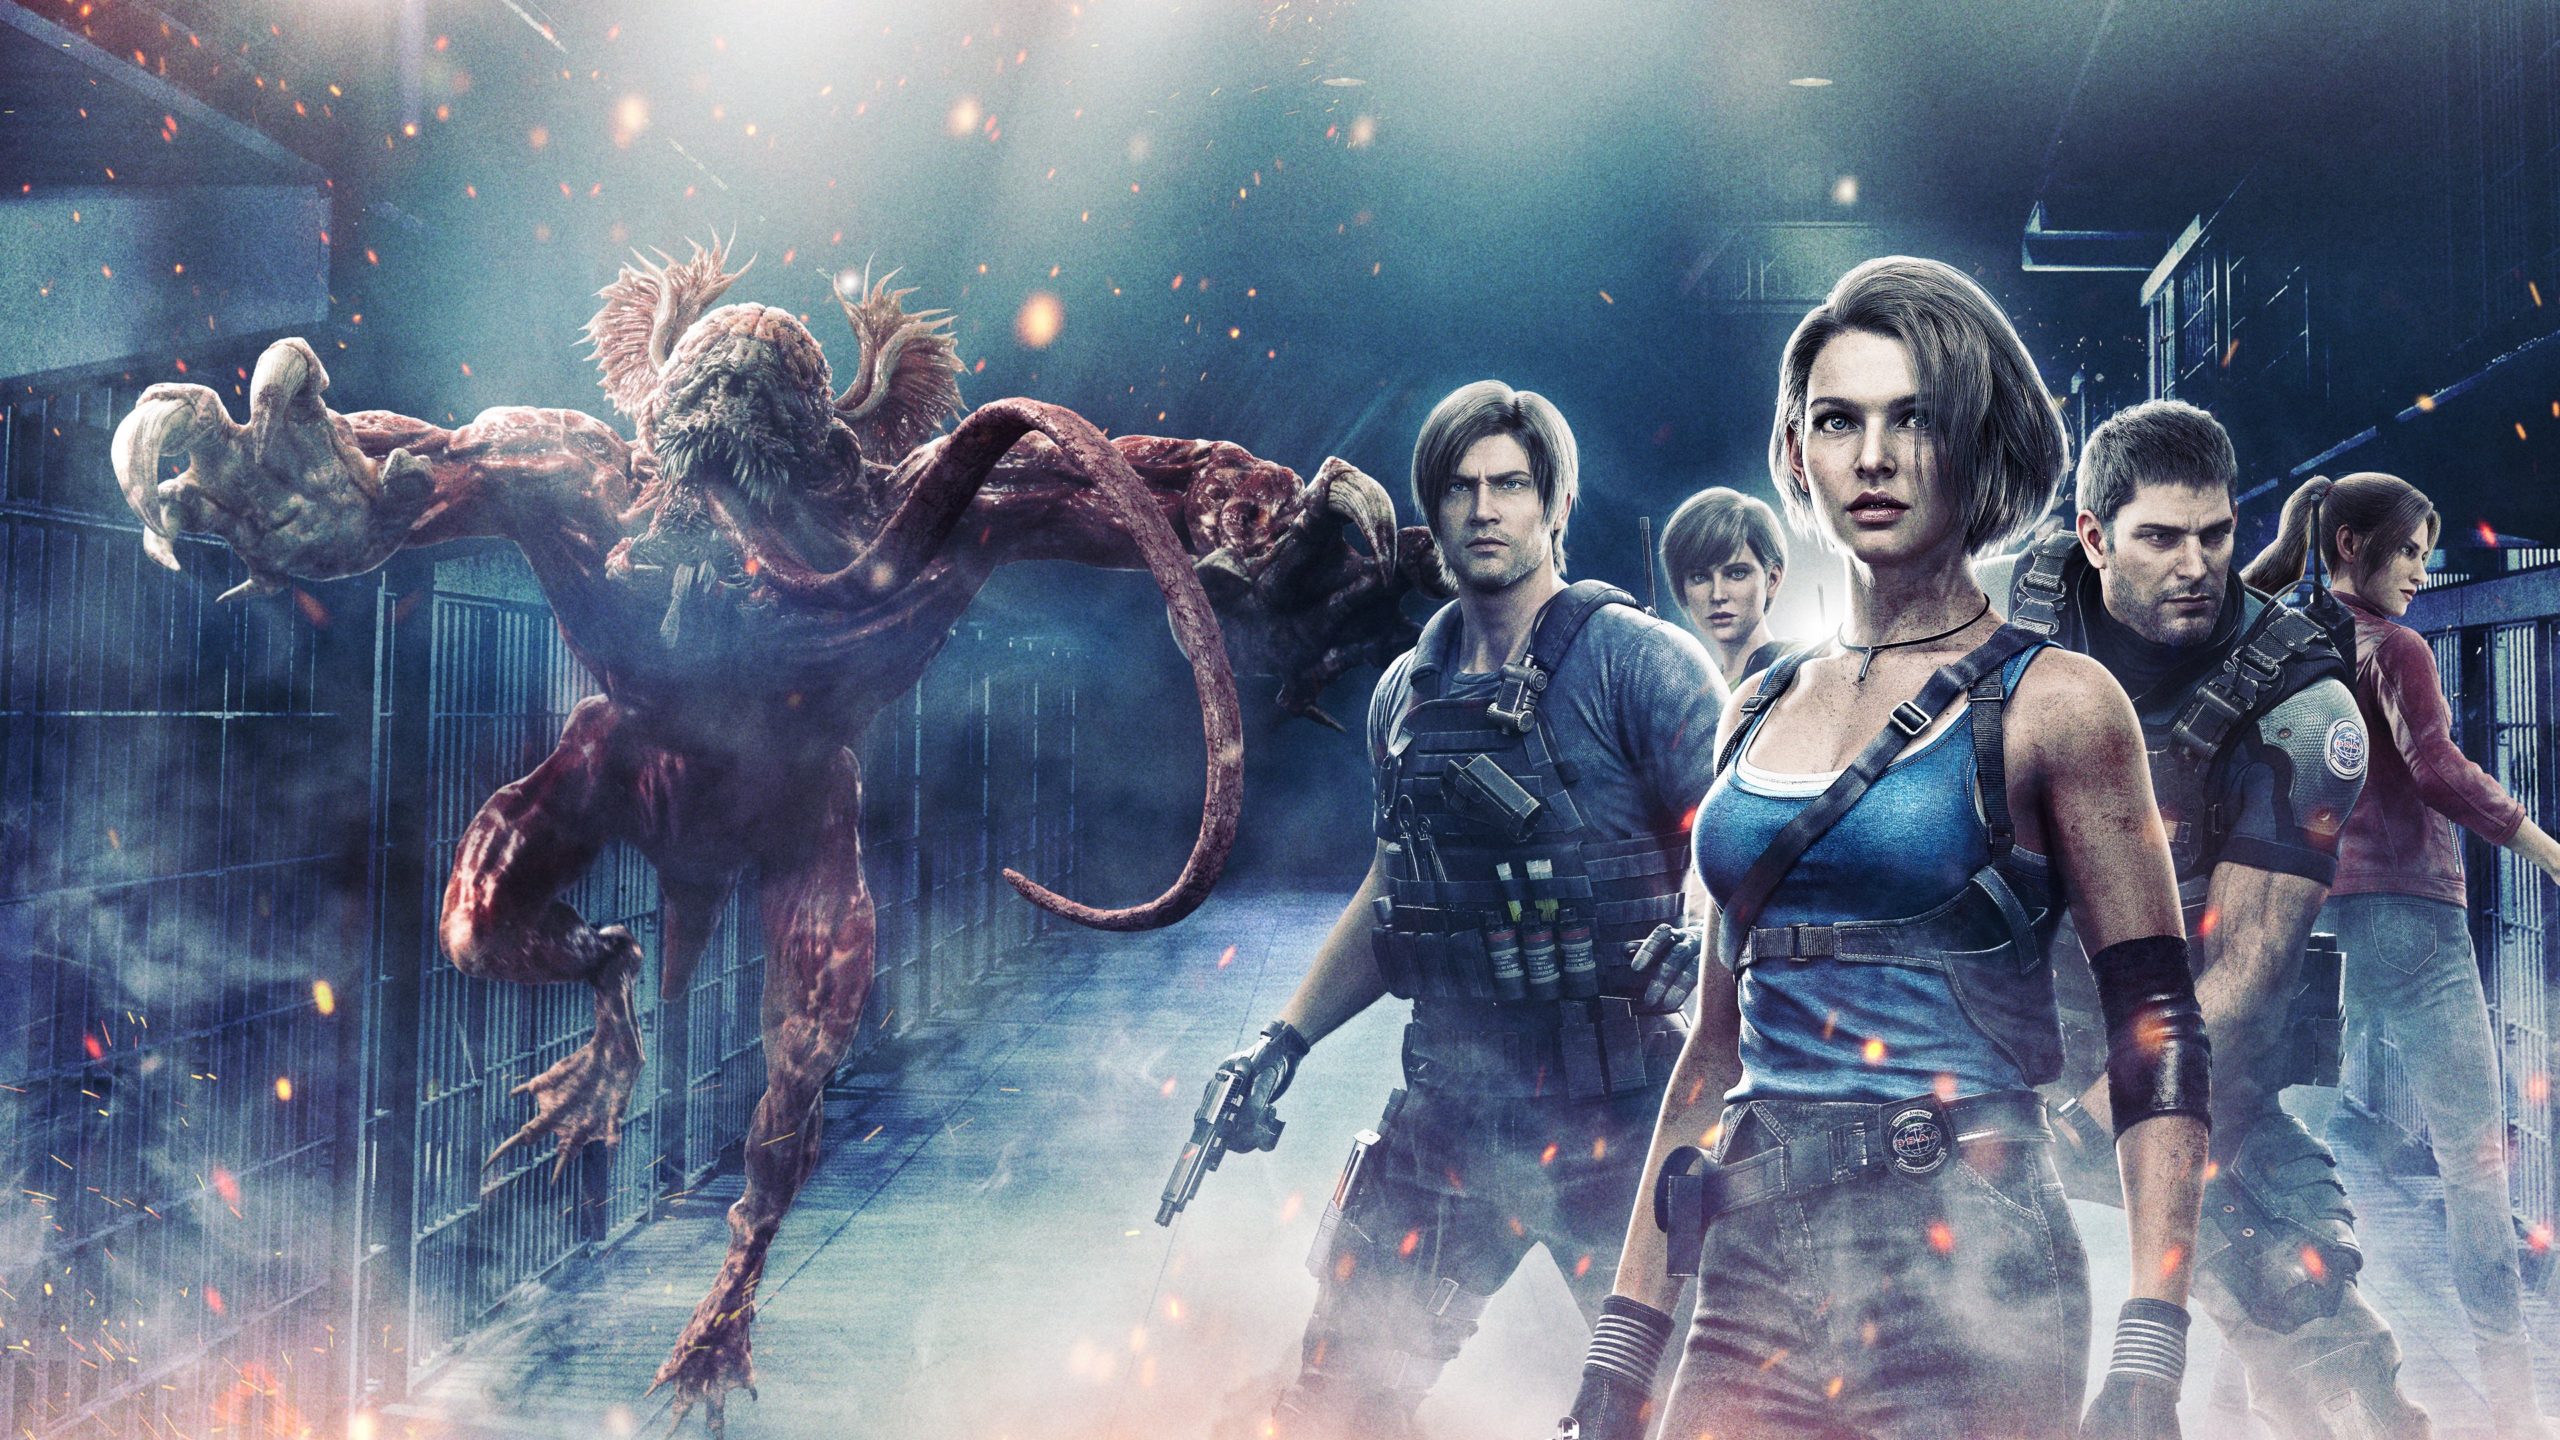 Resident Evil Movie Reboot Announced, Casts Jill Valentine & Claire